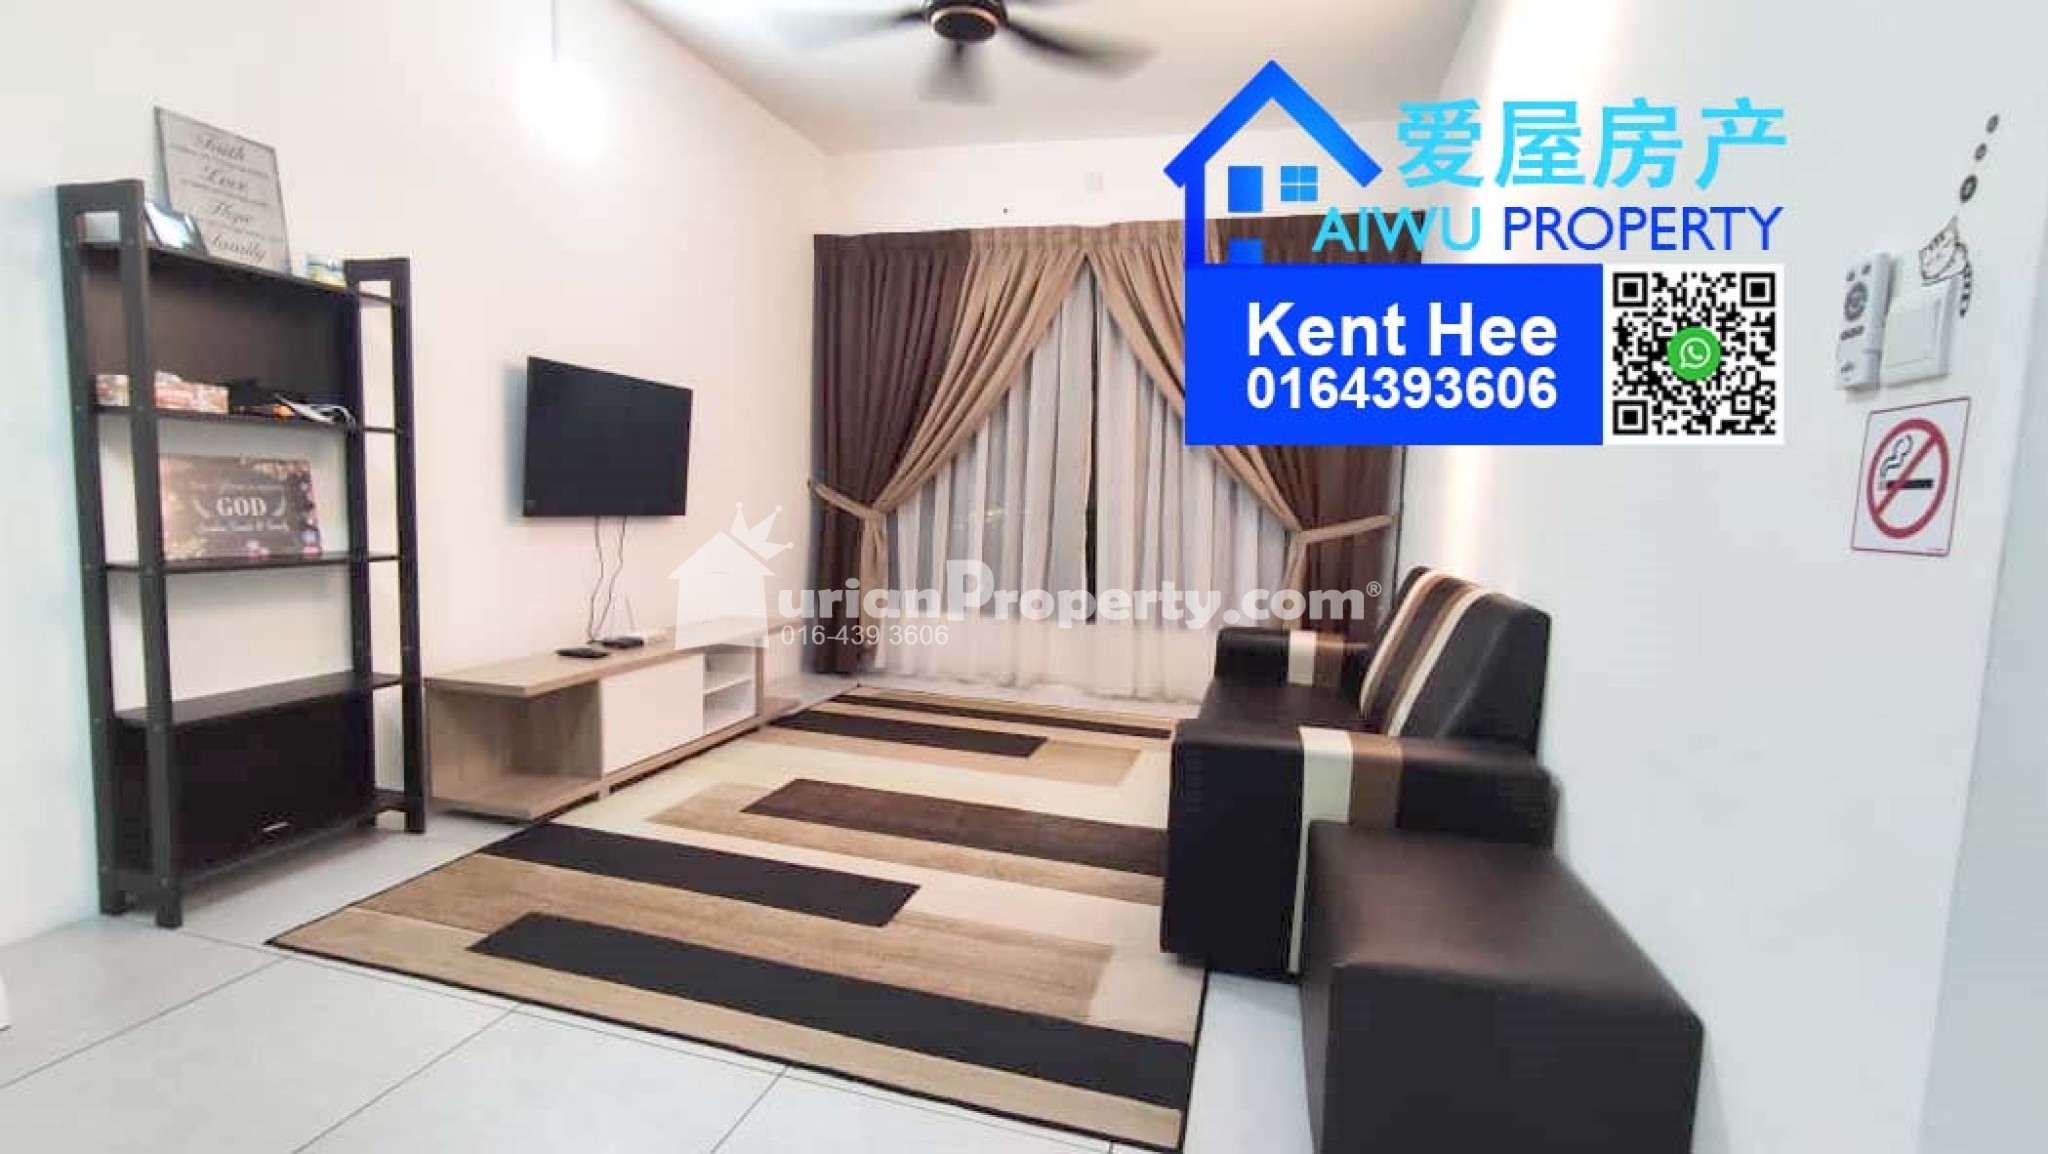 Condo For Sale at Meritus Residence